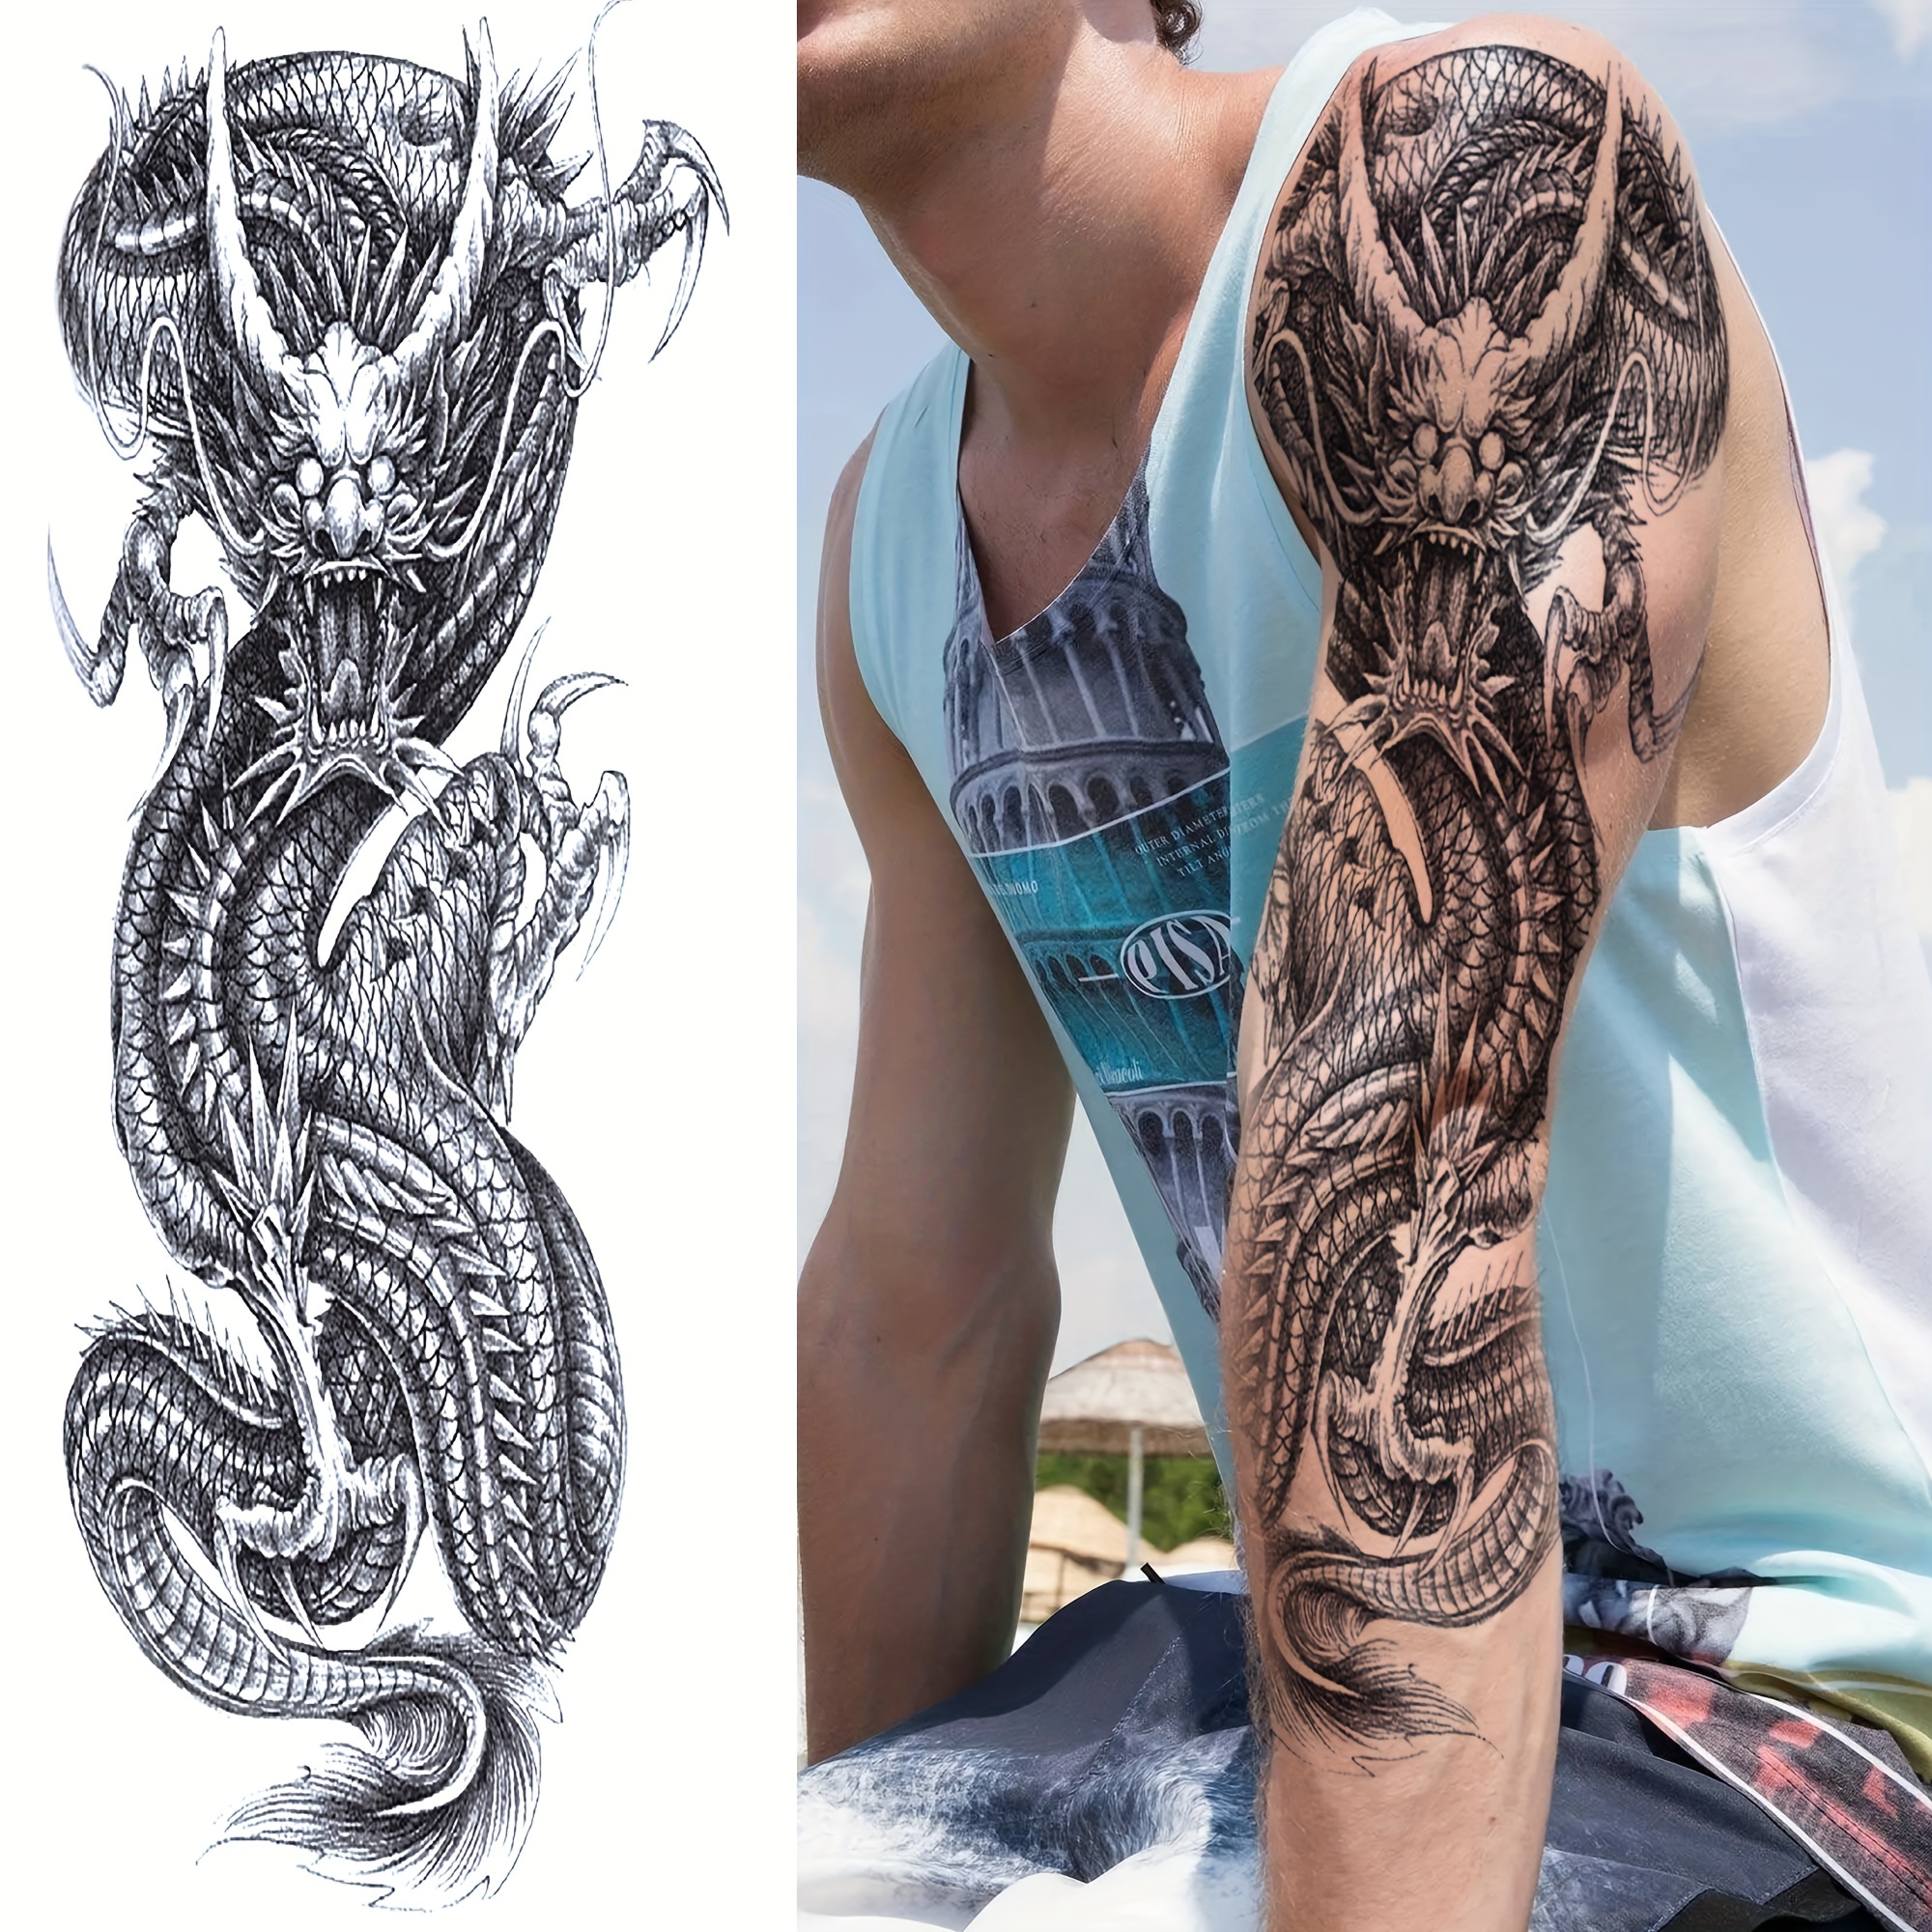  Fake Totem Sleeve Tattoos Stickers, Full Arm Tribal Totem  Temporary Tattoos Sleeves for Adult Kids Women Makeup, 12-Sheet : Beauty &  Personal Care